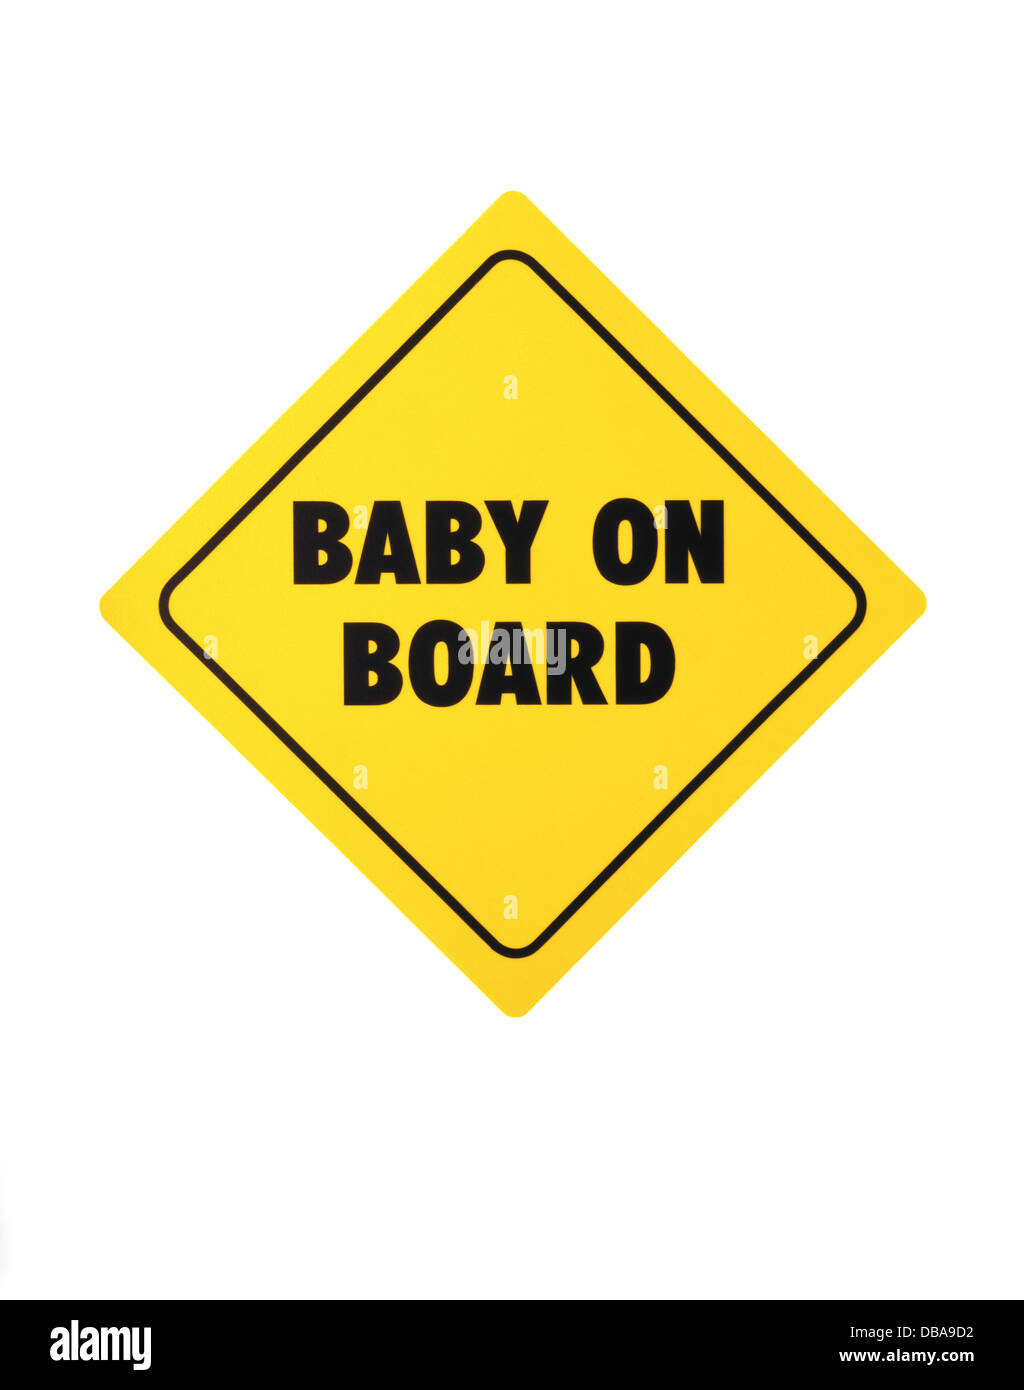 Baby on Board Stock Photo